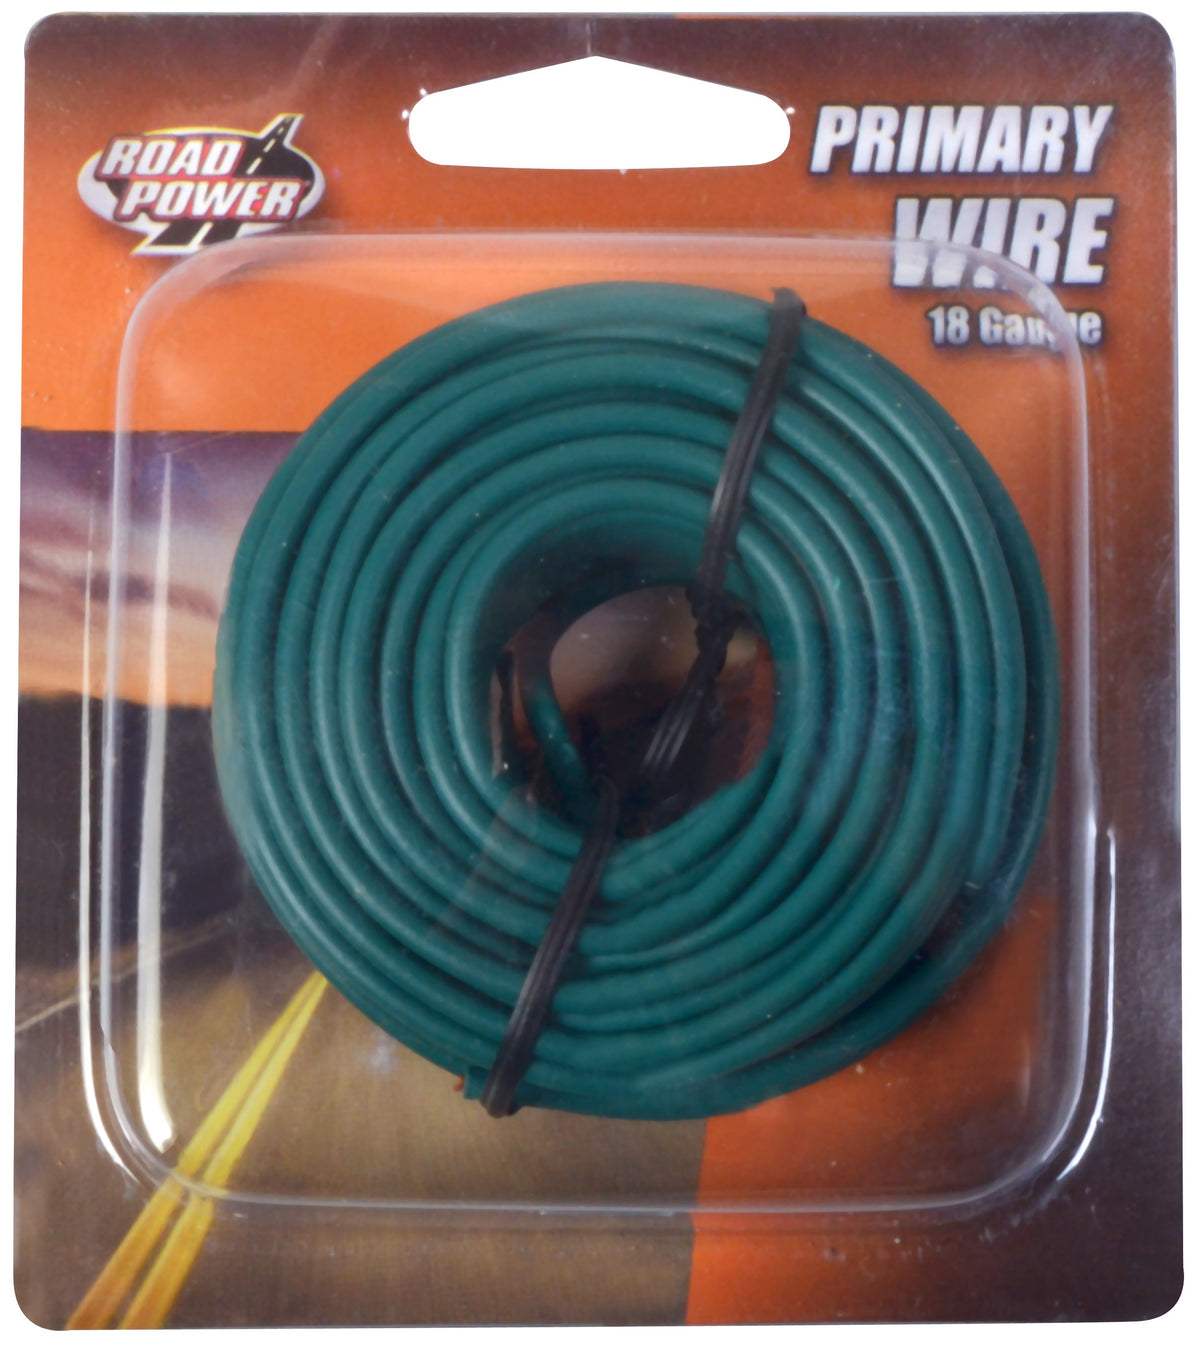 Road Power 55835033 Primary Electrical Wire, 18 Guage, 33', Green